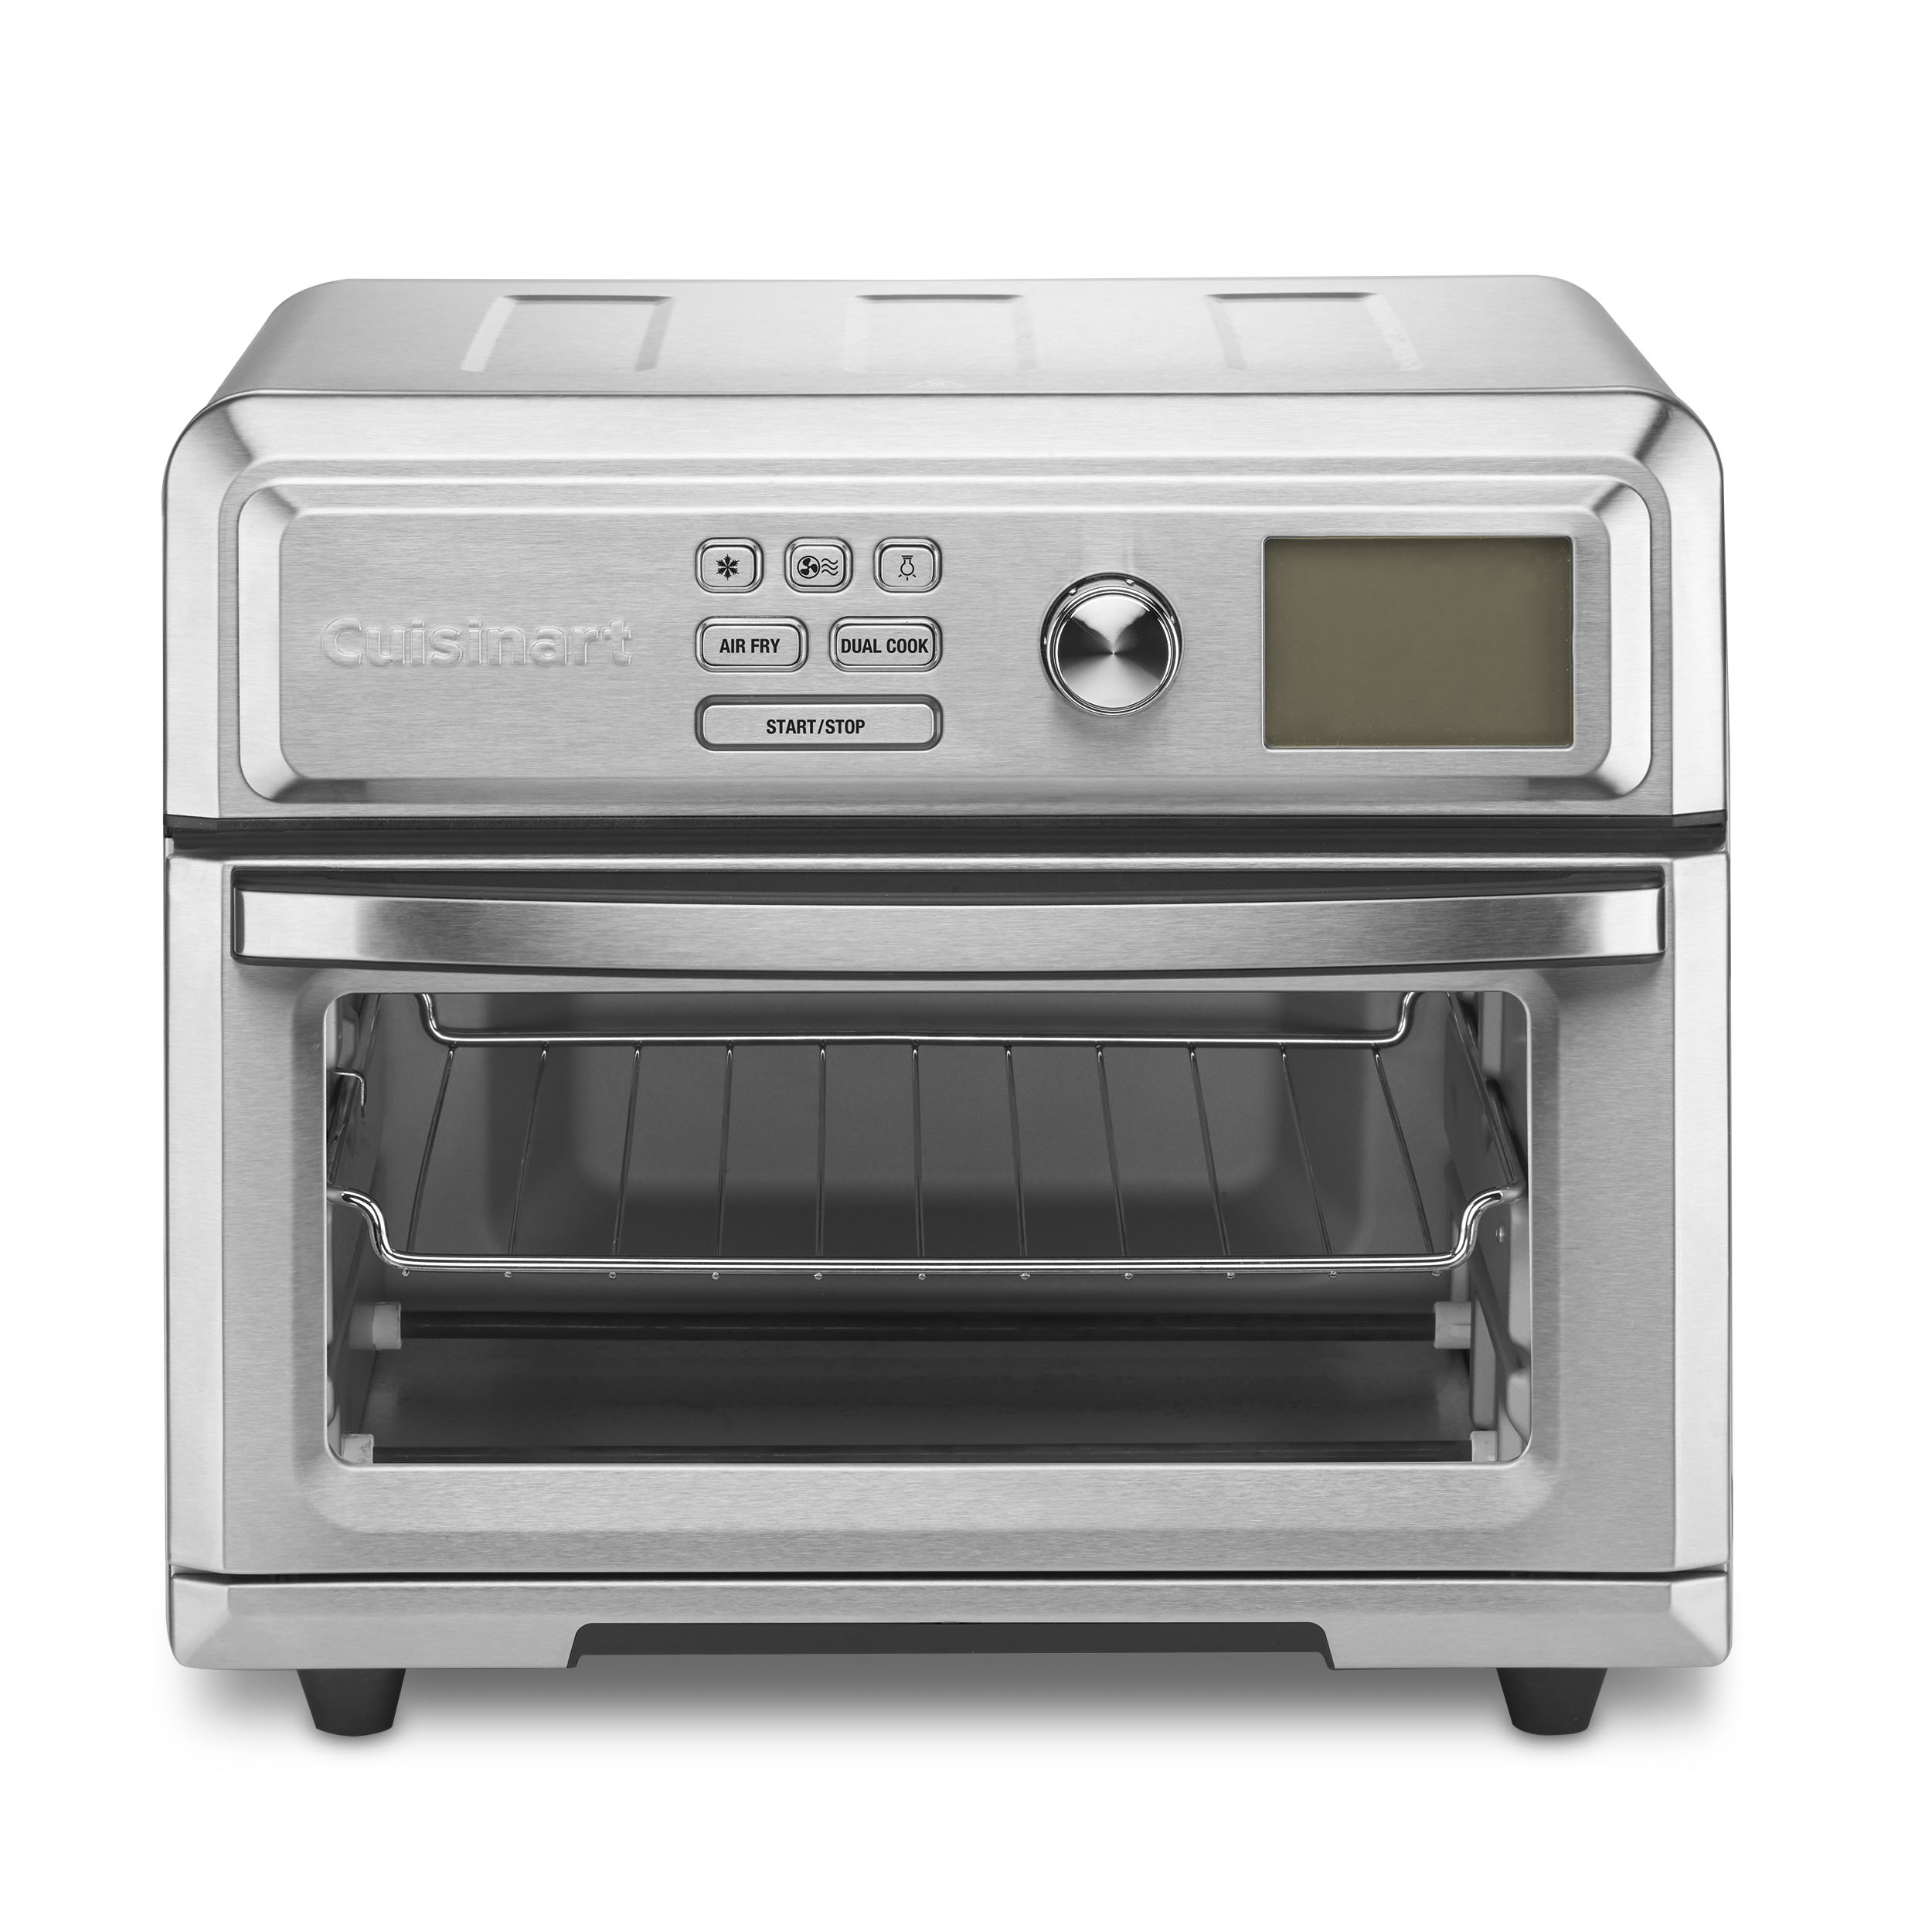 Cuisinart TOA-65 Digital Convection Toaster Oven Airfryer, Silver - image 3 of 3